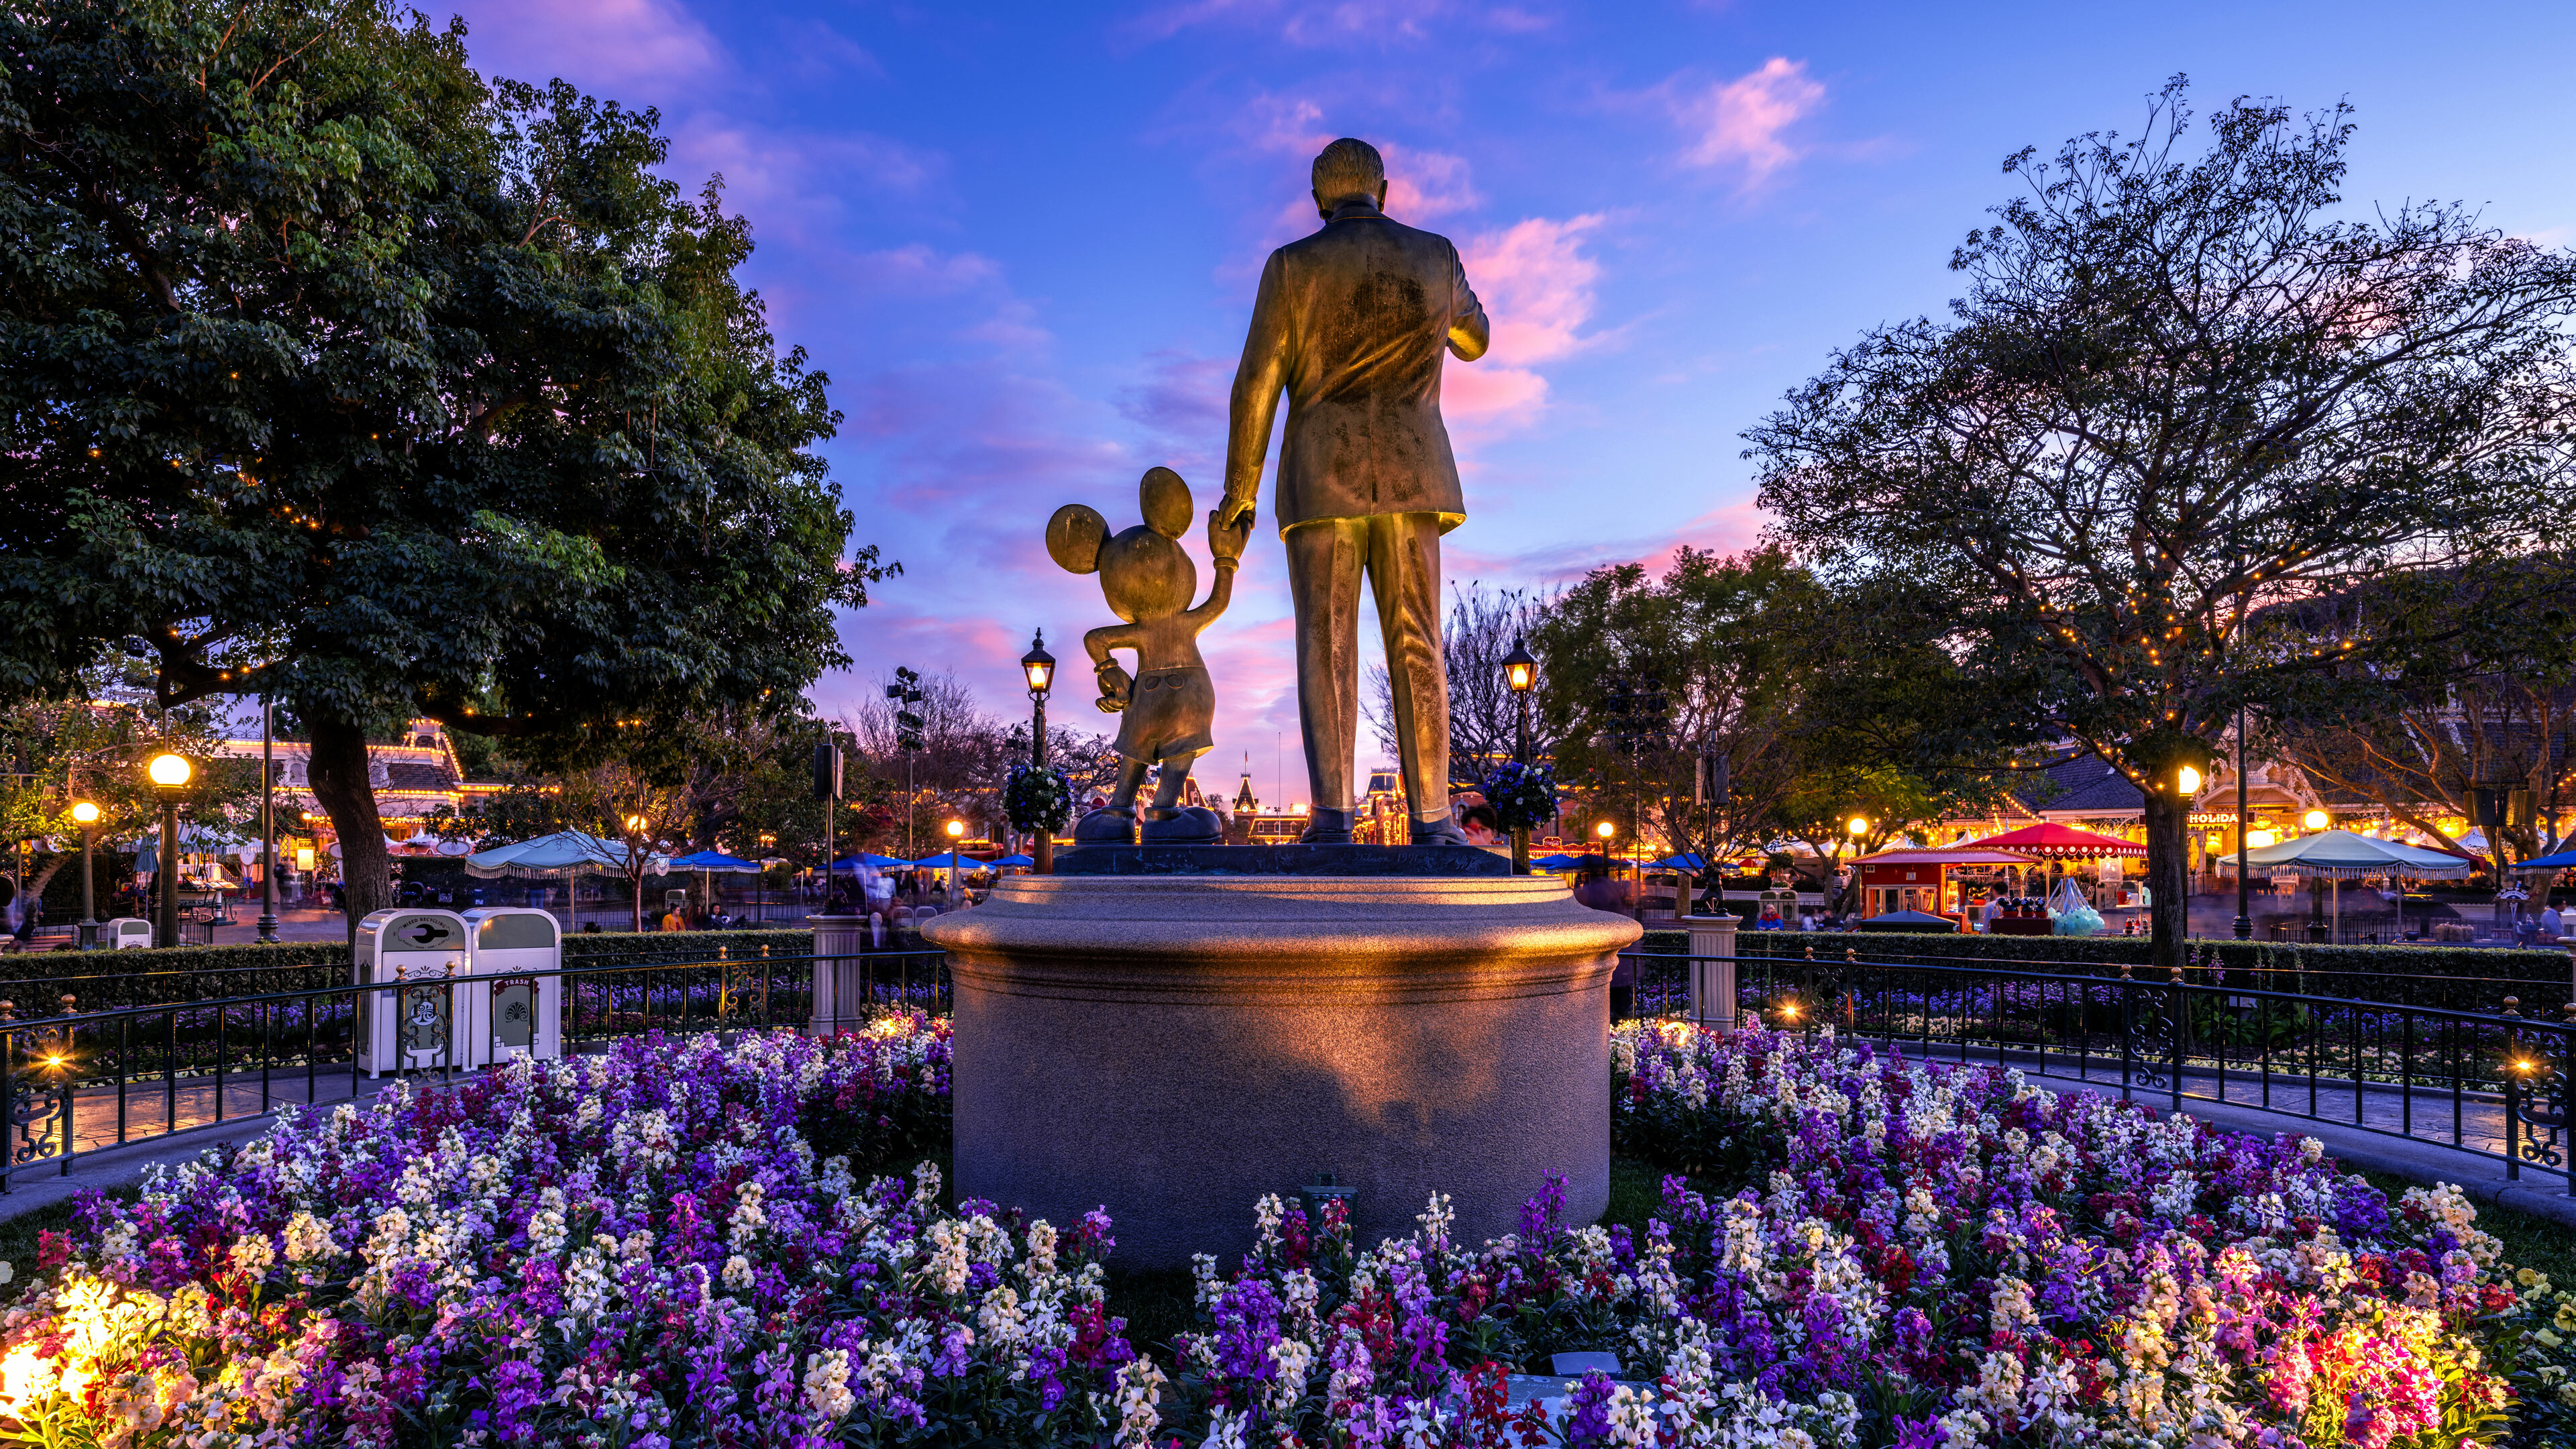 Disneyland: Was opened on July 17, 1955, and was the first Disney theme park. 3840x2160 4K Wallpaper.